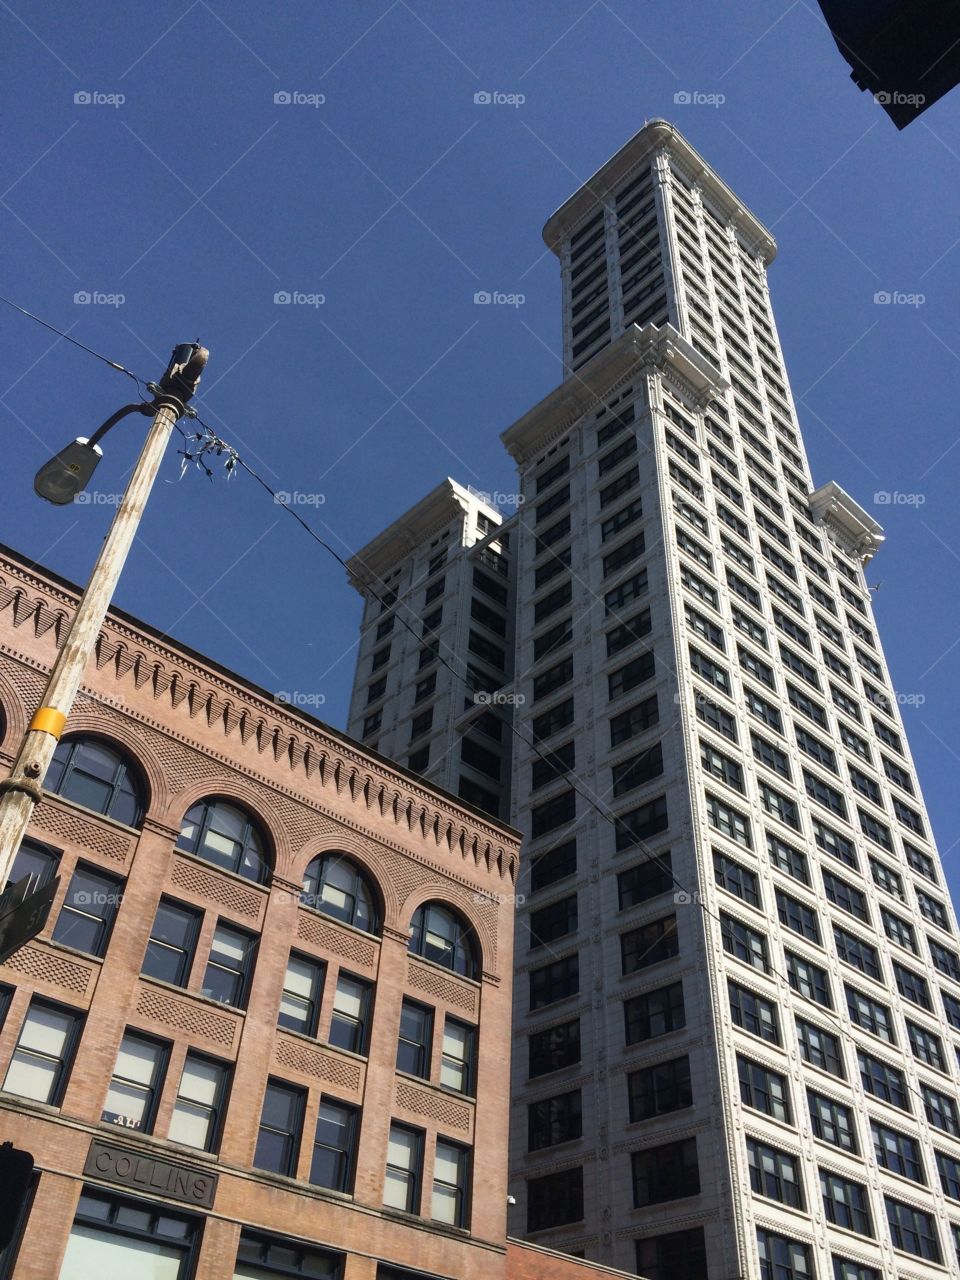 Looking up at the Smith Tower in Seattle.